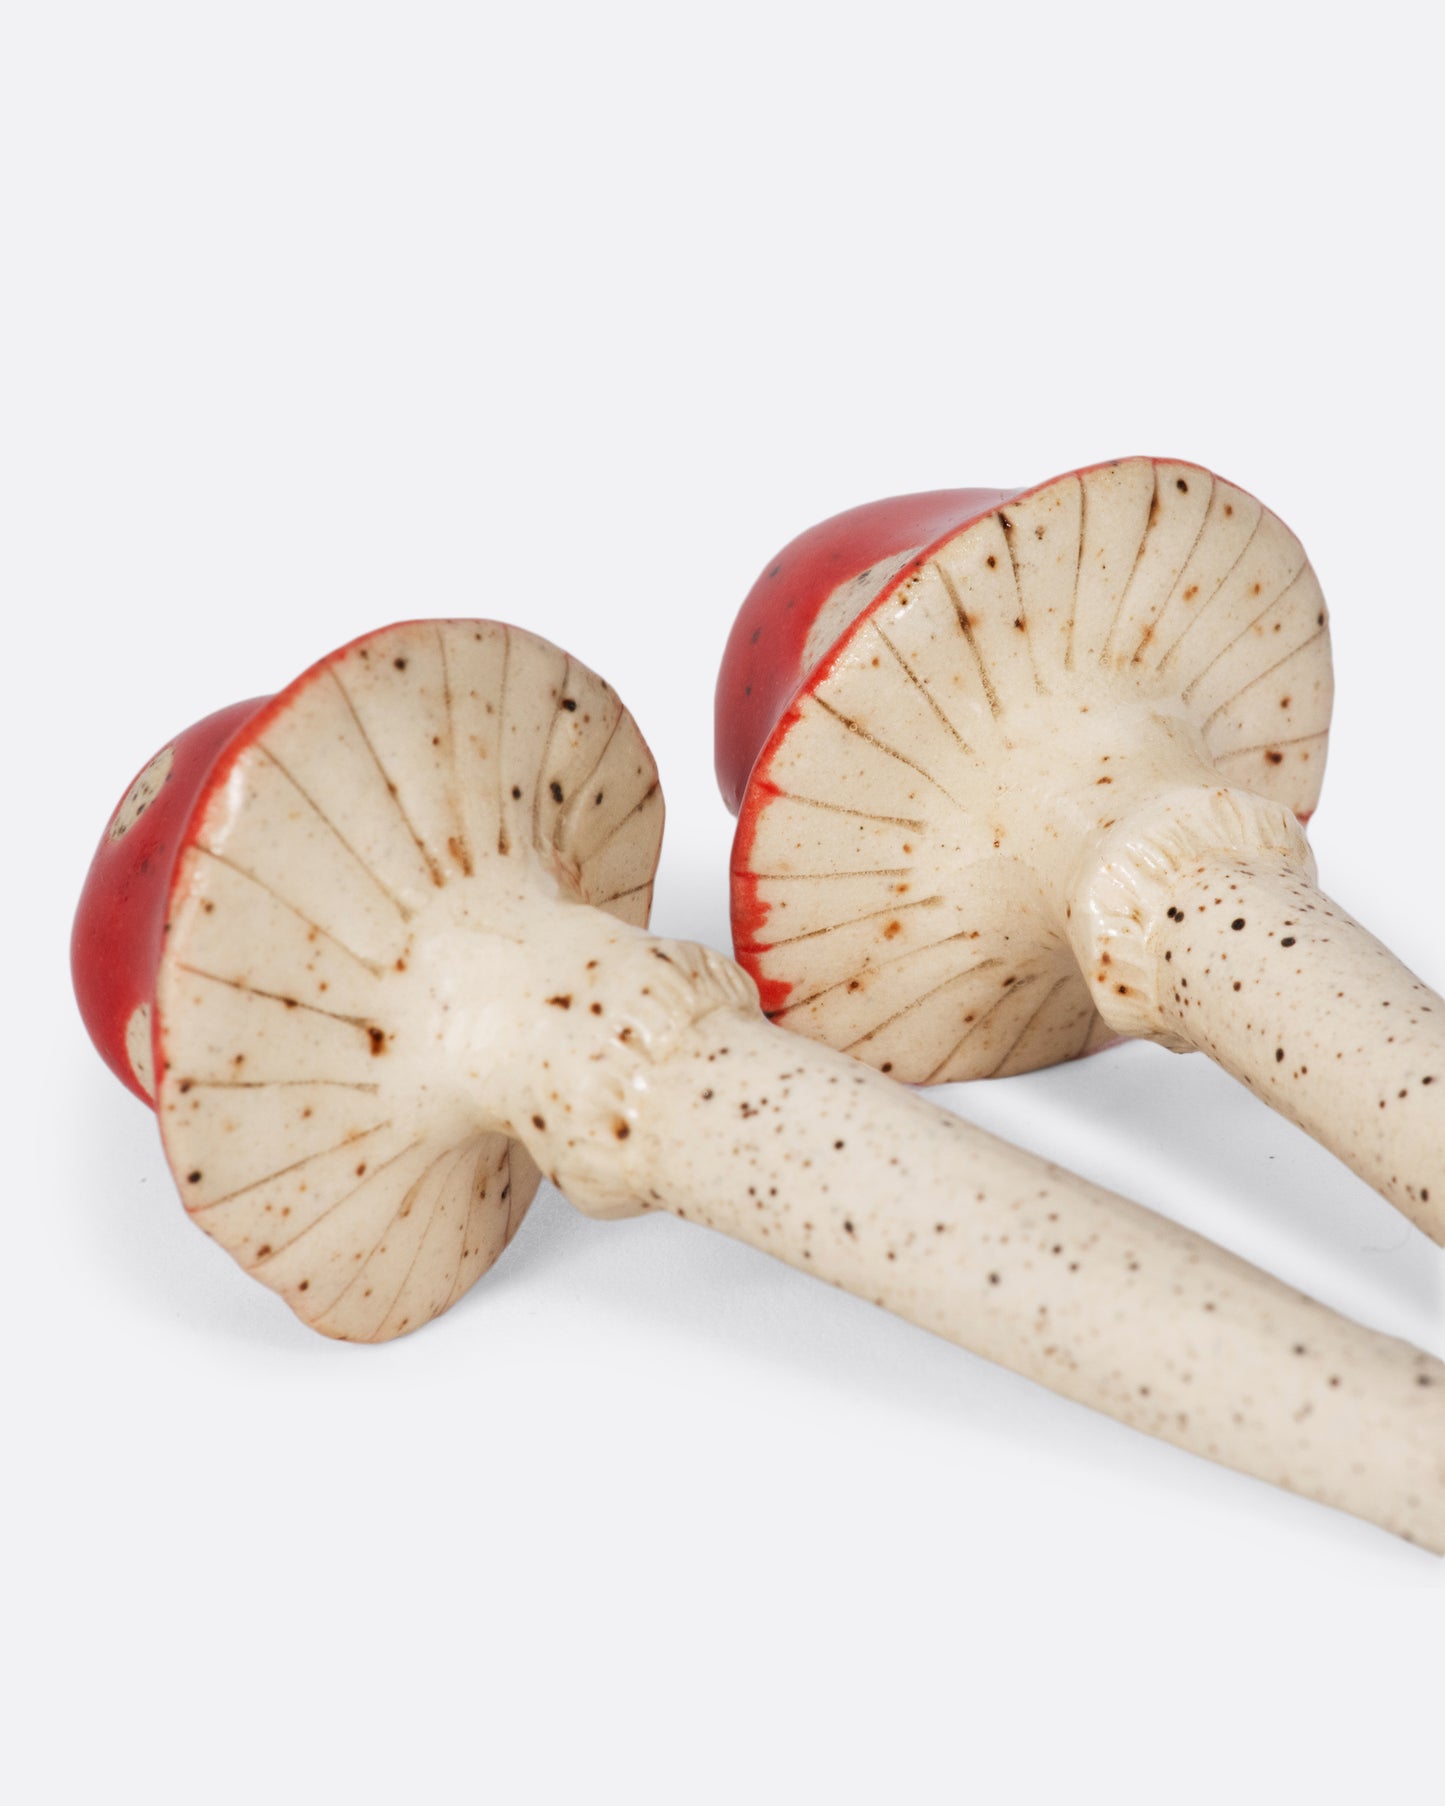 These ceramic shroom plant sculptures are like little friends for your house plant—a staple in our dopamine decor.